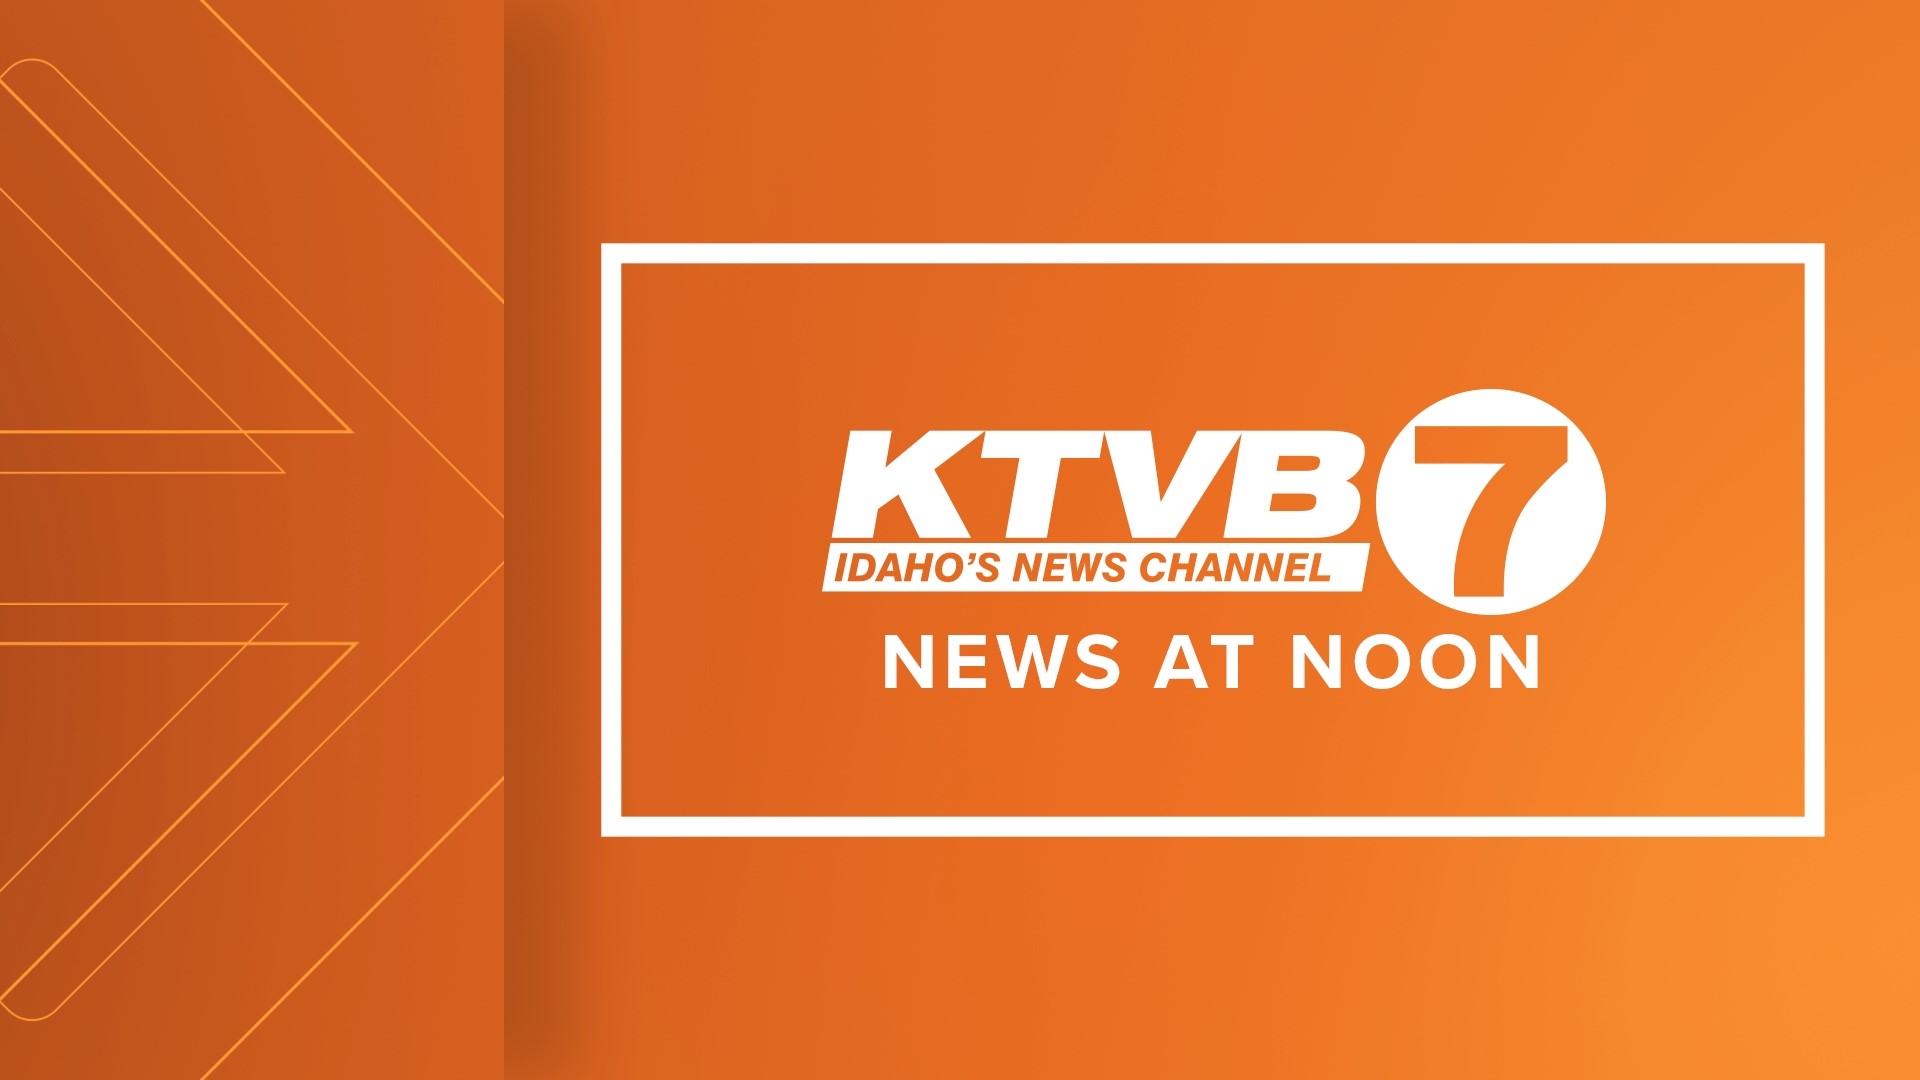 Watch the KTVB News at Noon for local weather from a certified meteorologist and the day’s local, regional and national news.